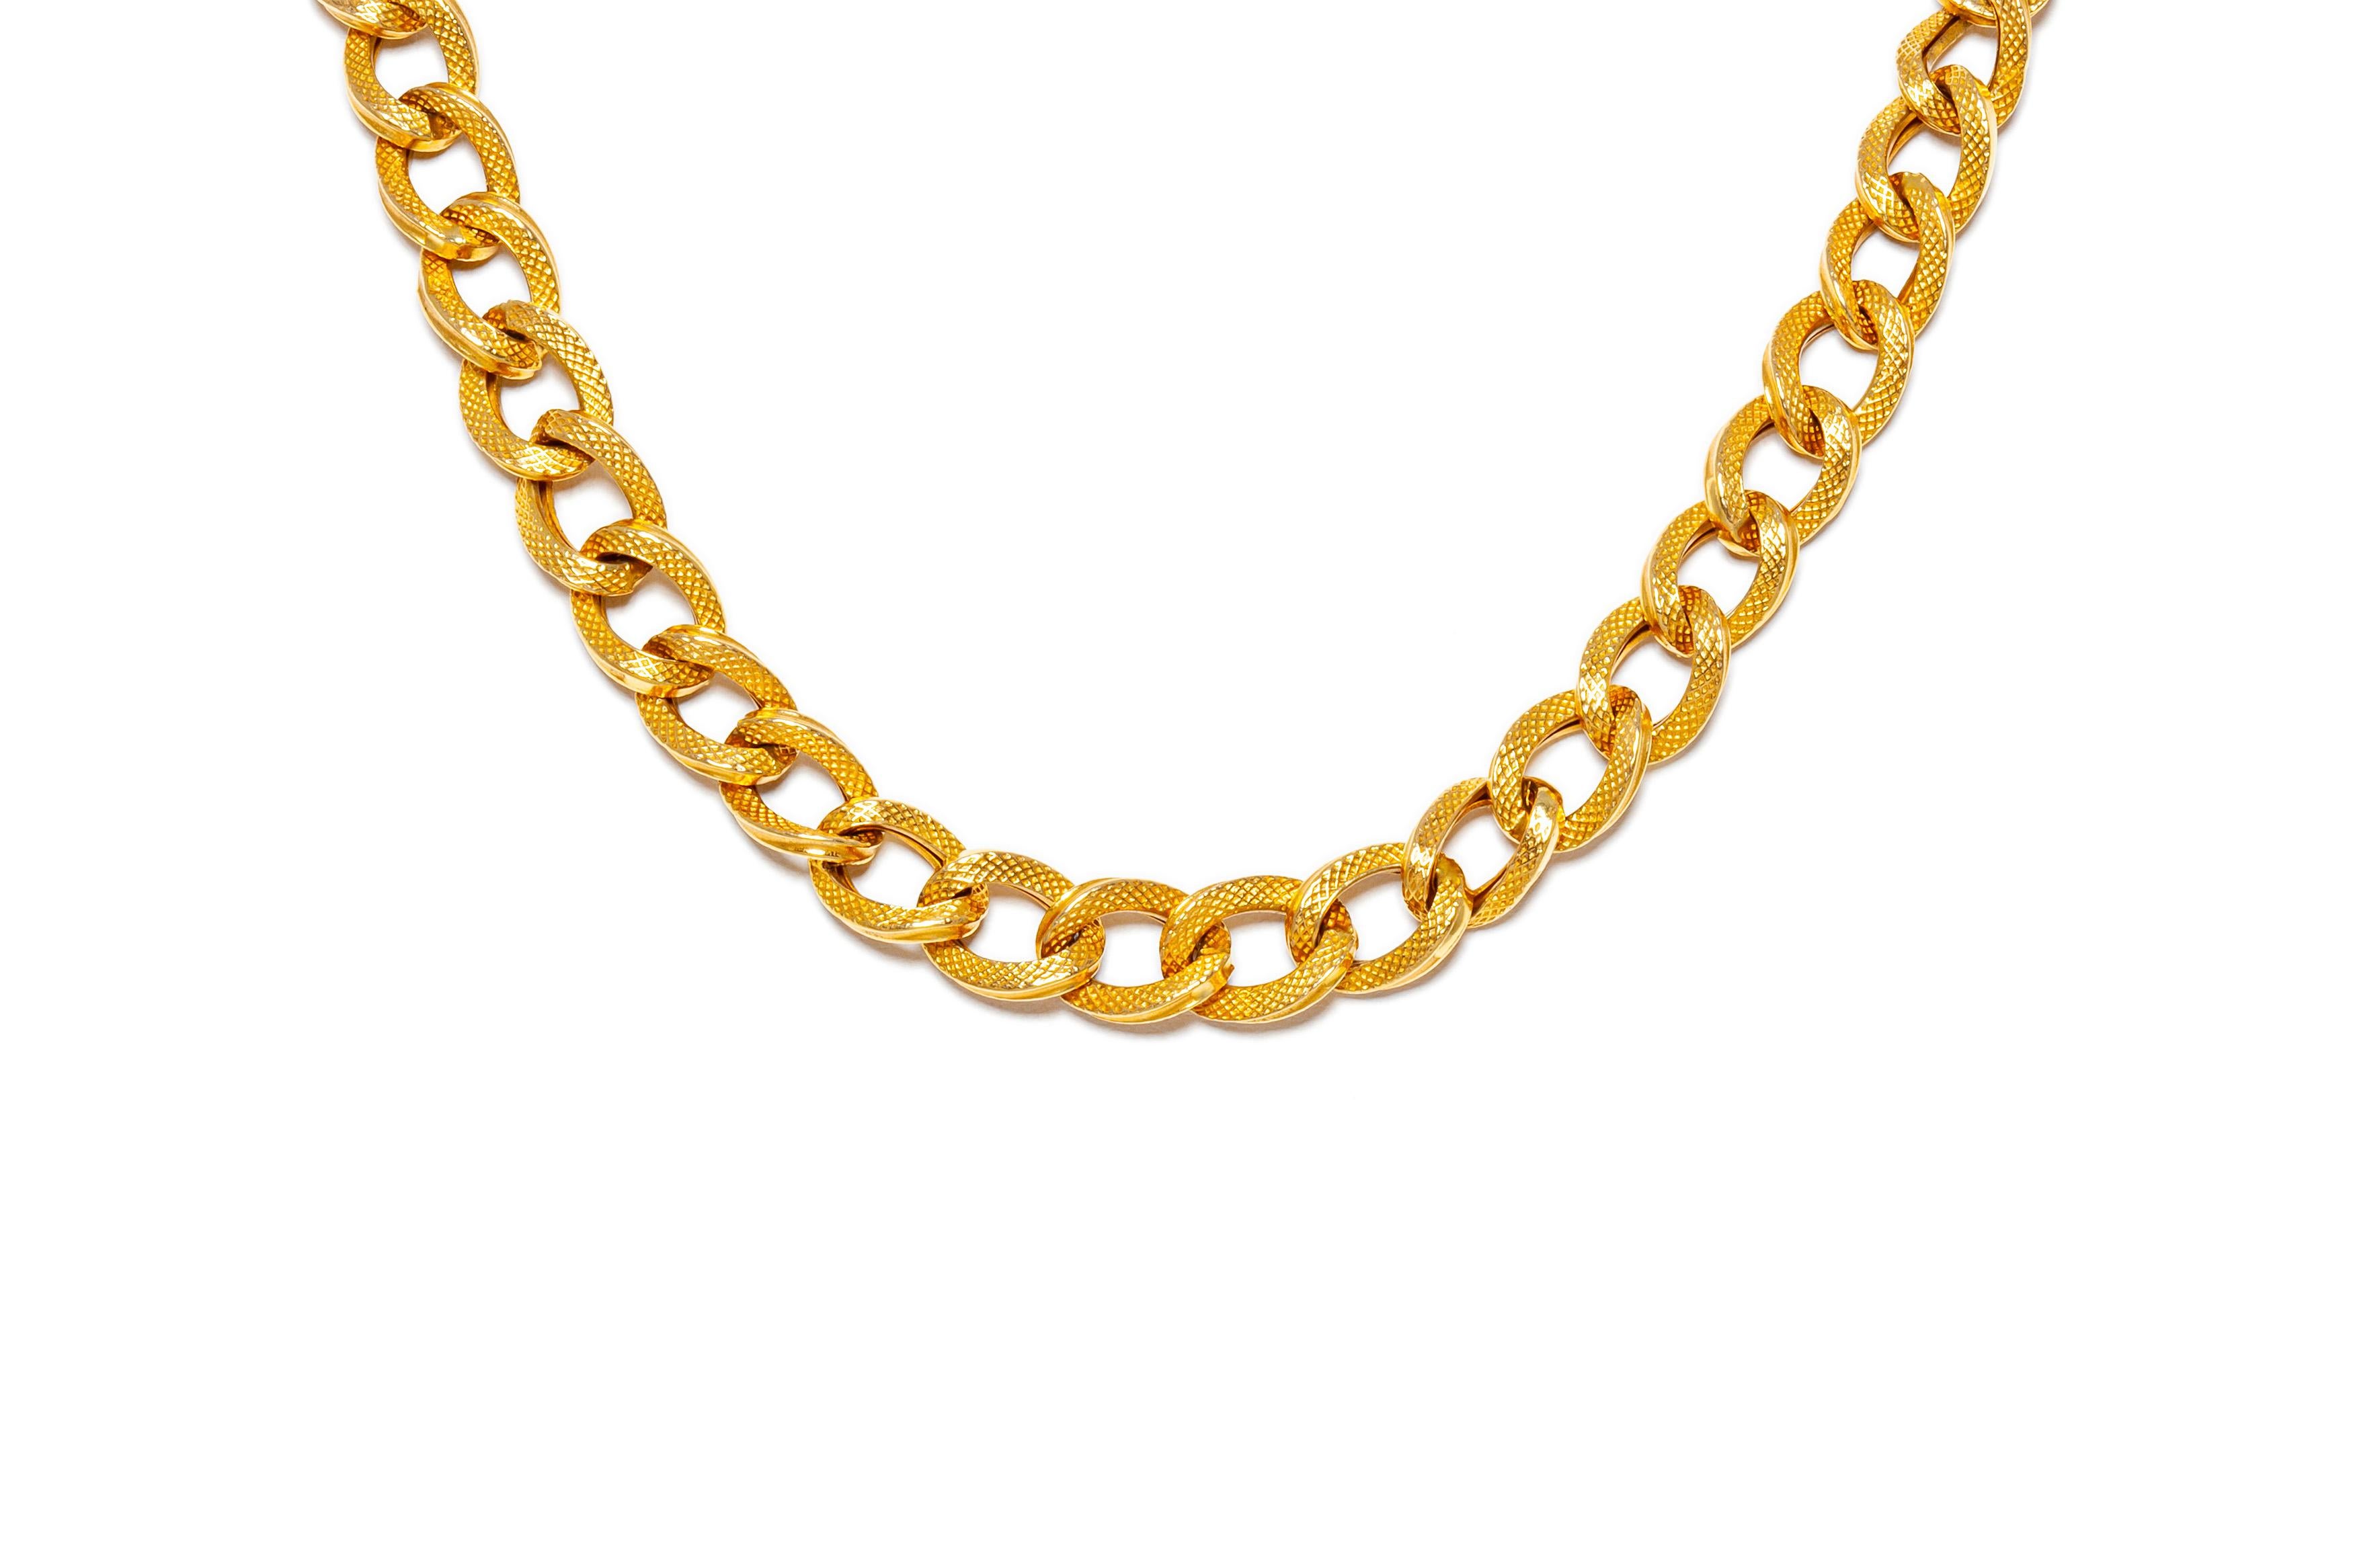 Chain, finely crafted in 18k yellow gold weighing 31.2 DWT with a length 38 inch. Circa 1980's. 